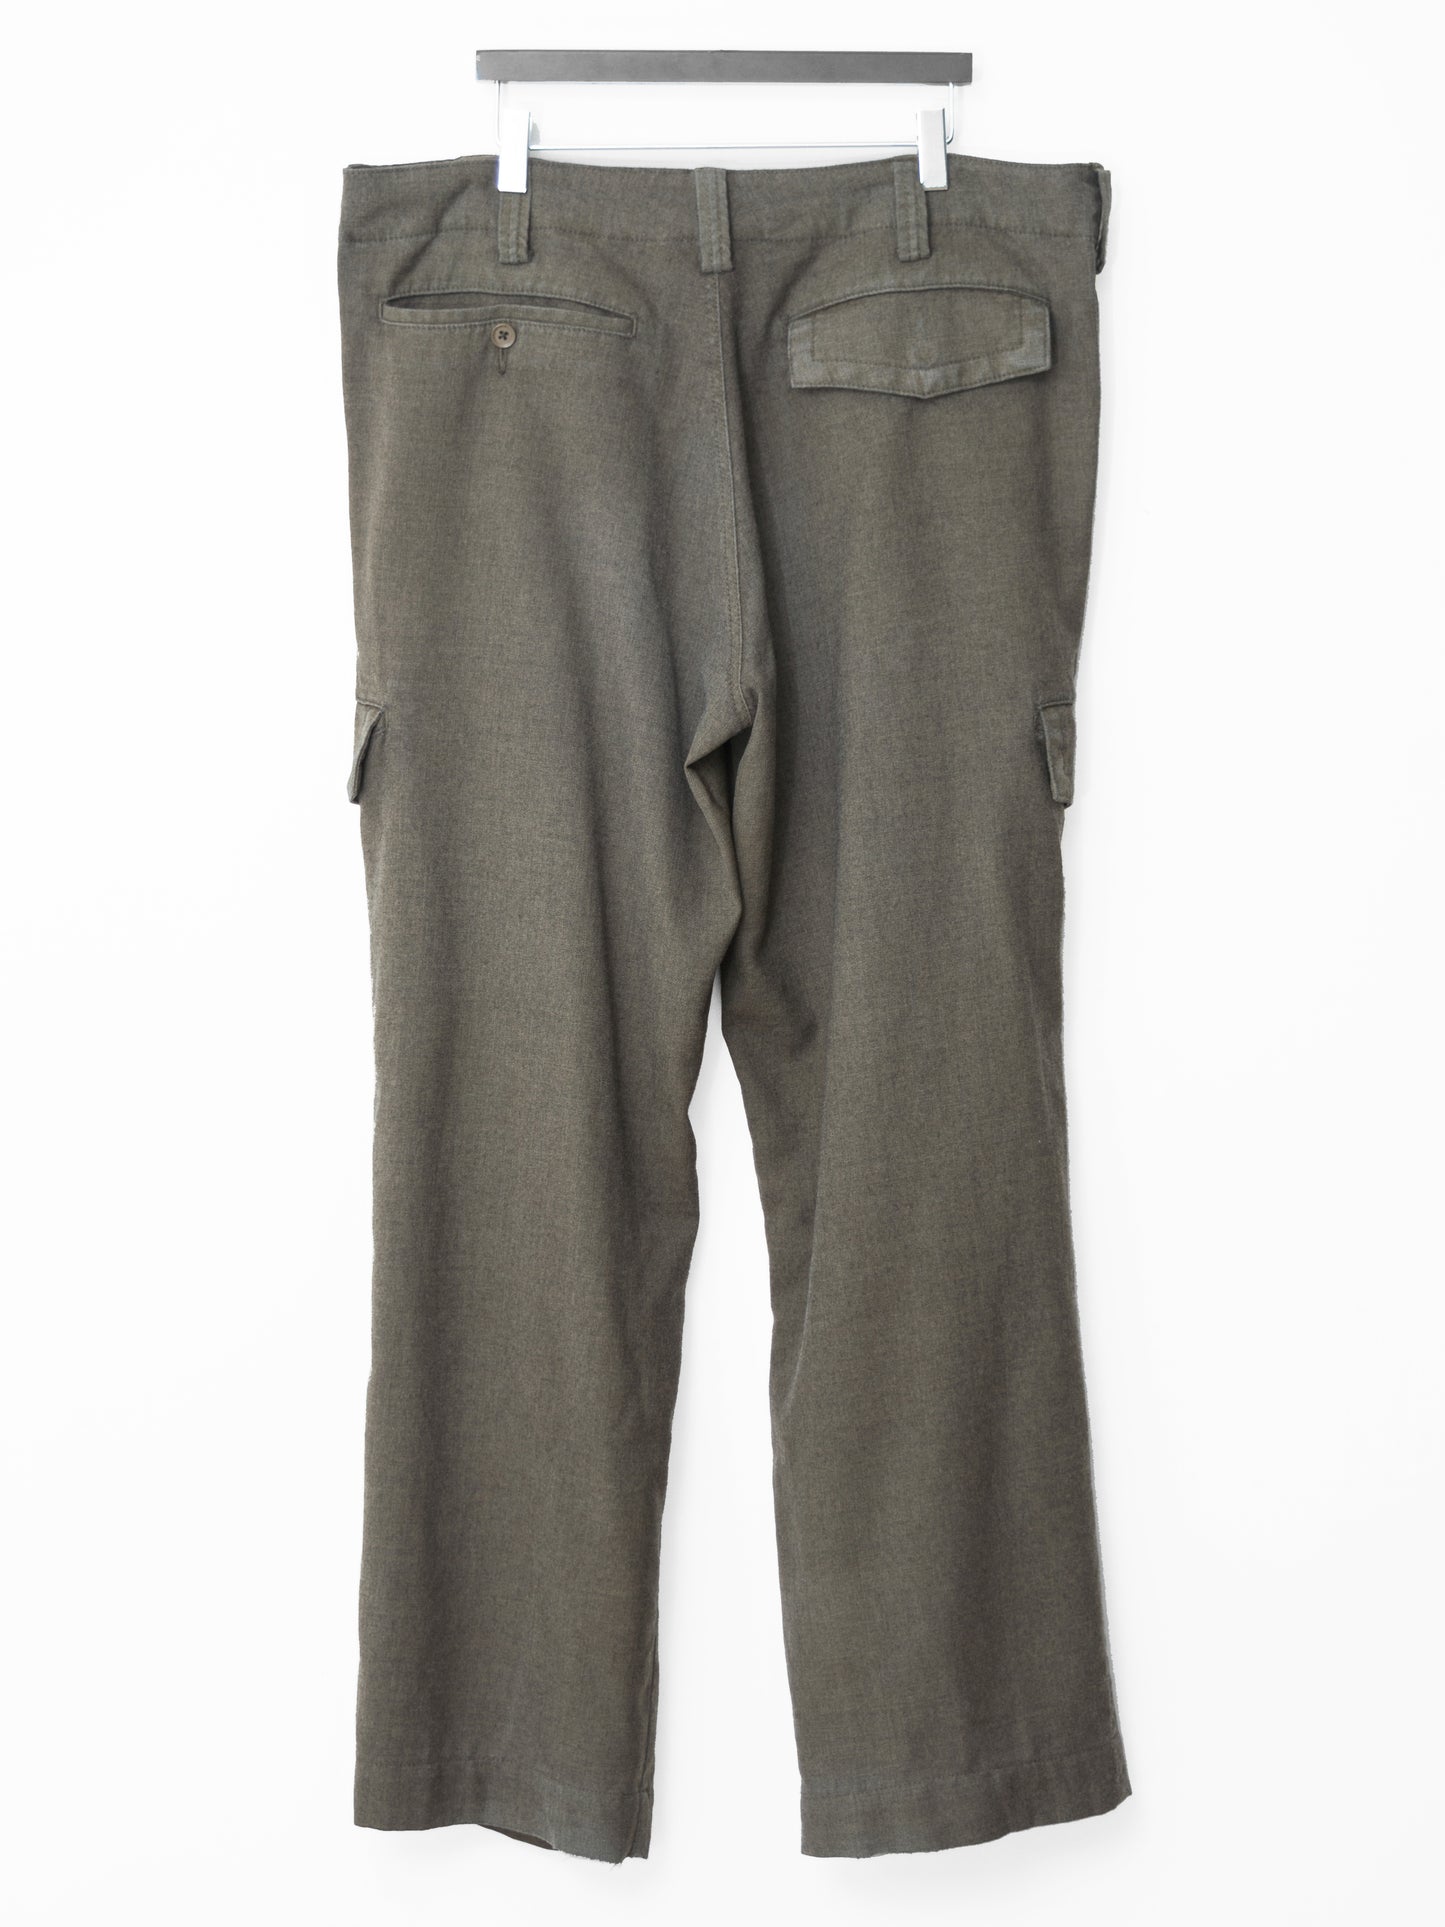 a/w 08 pigment printed cargo pants aged brown ∙ wool ∙ medium